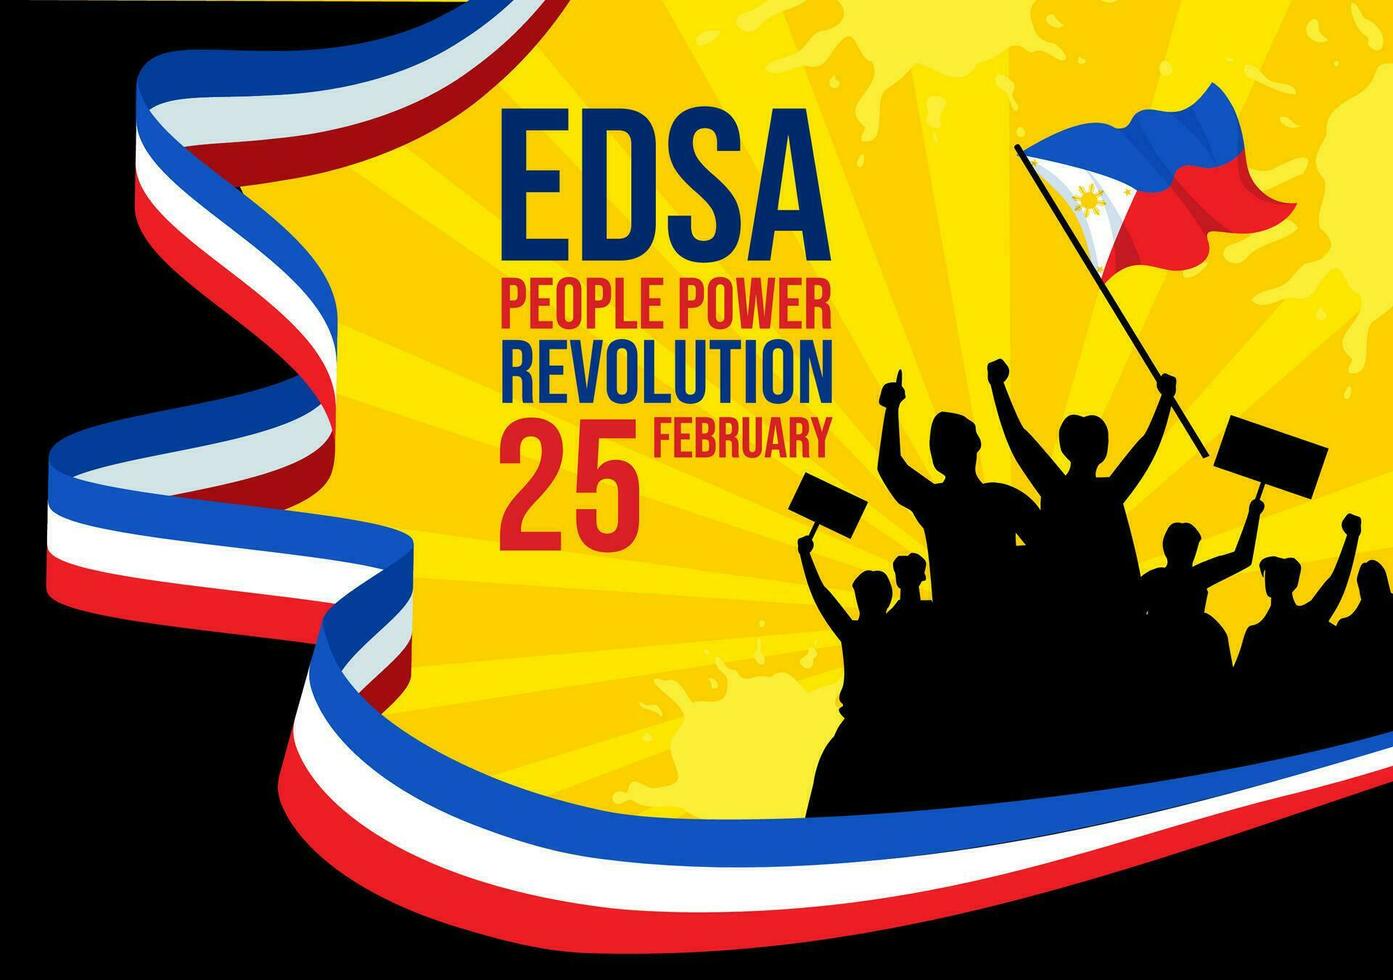 Edsa People Power Revolution Anniversary of Philippine Vector Illustration on February 25 with Philippines Flag in Holiday Flat Cartoon Background